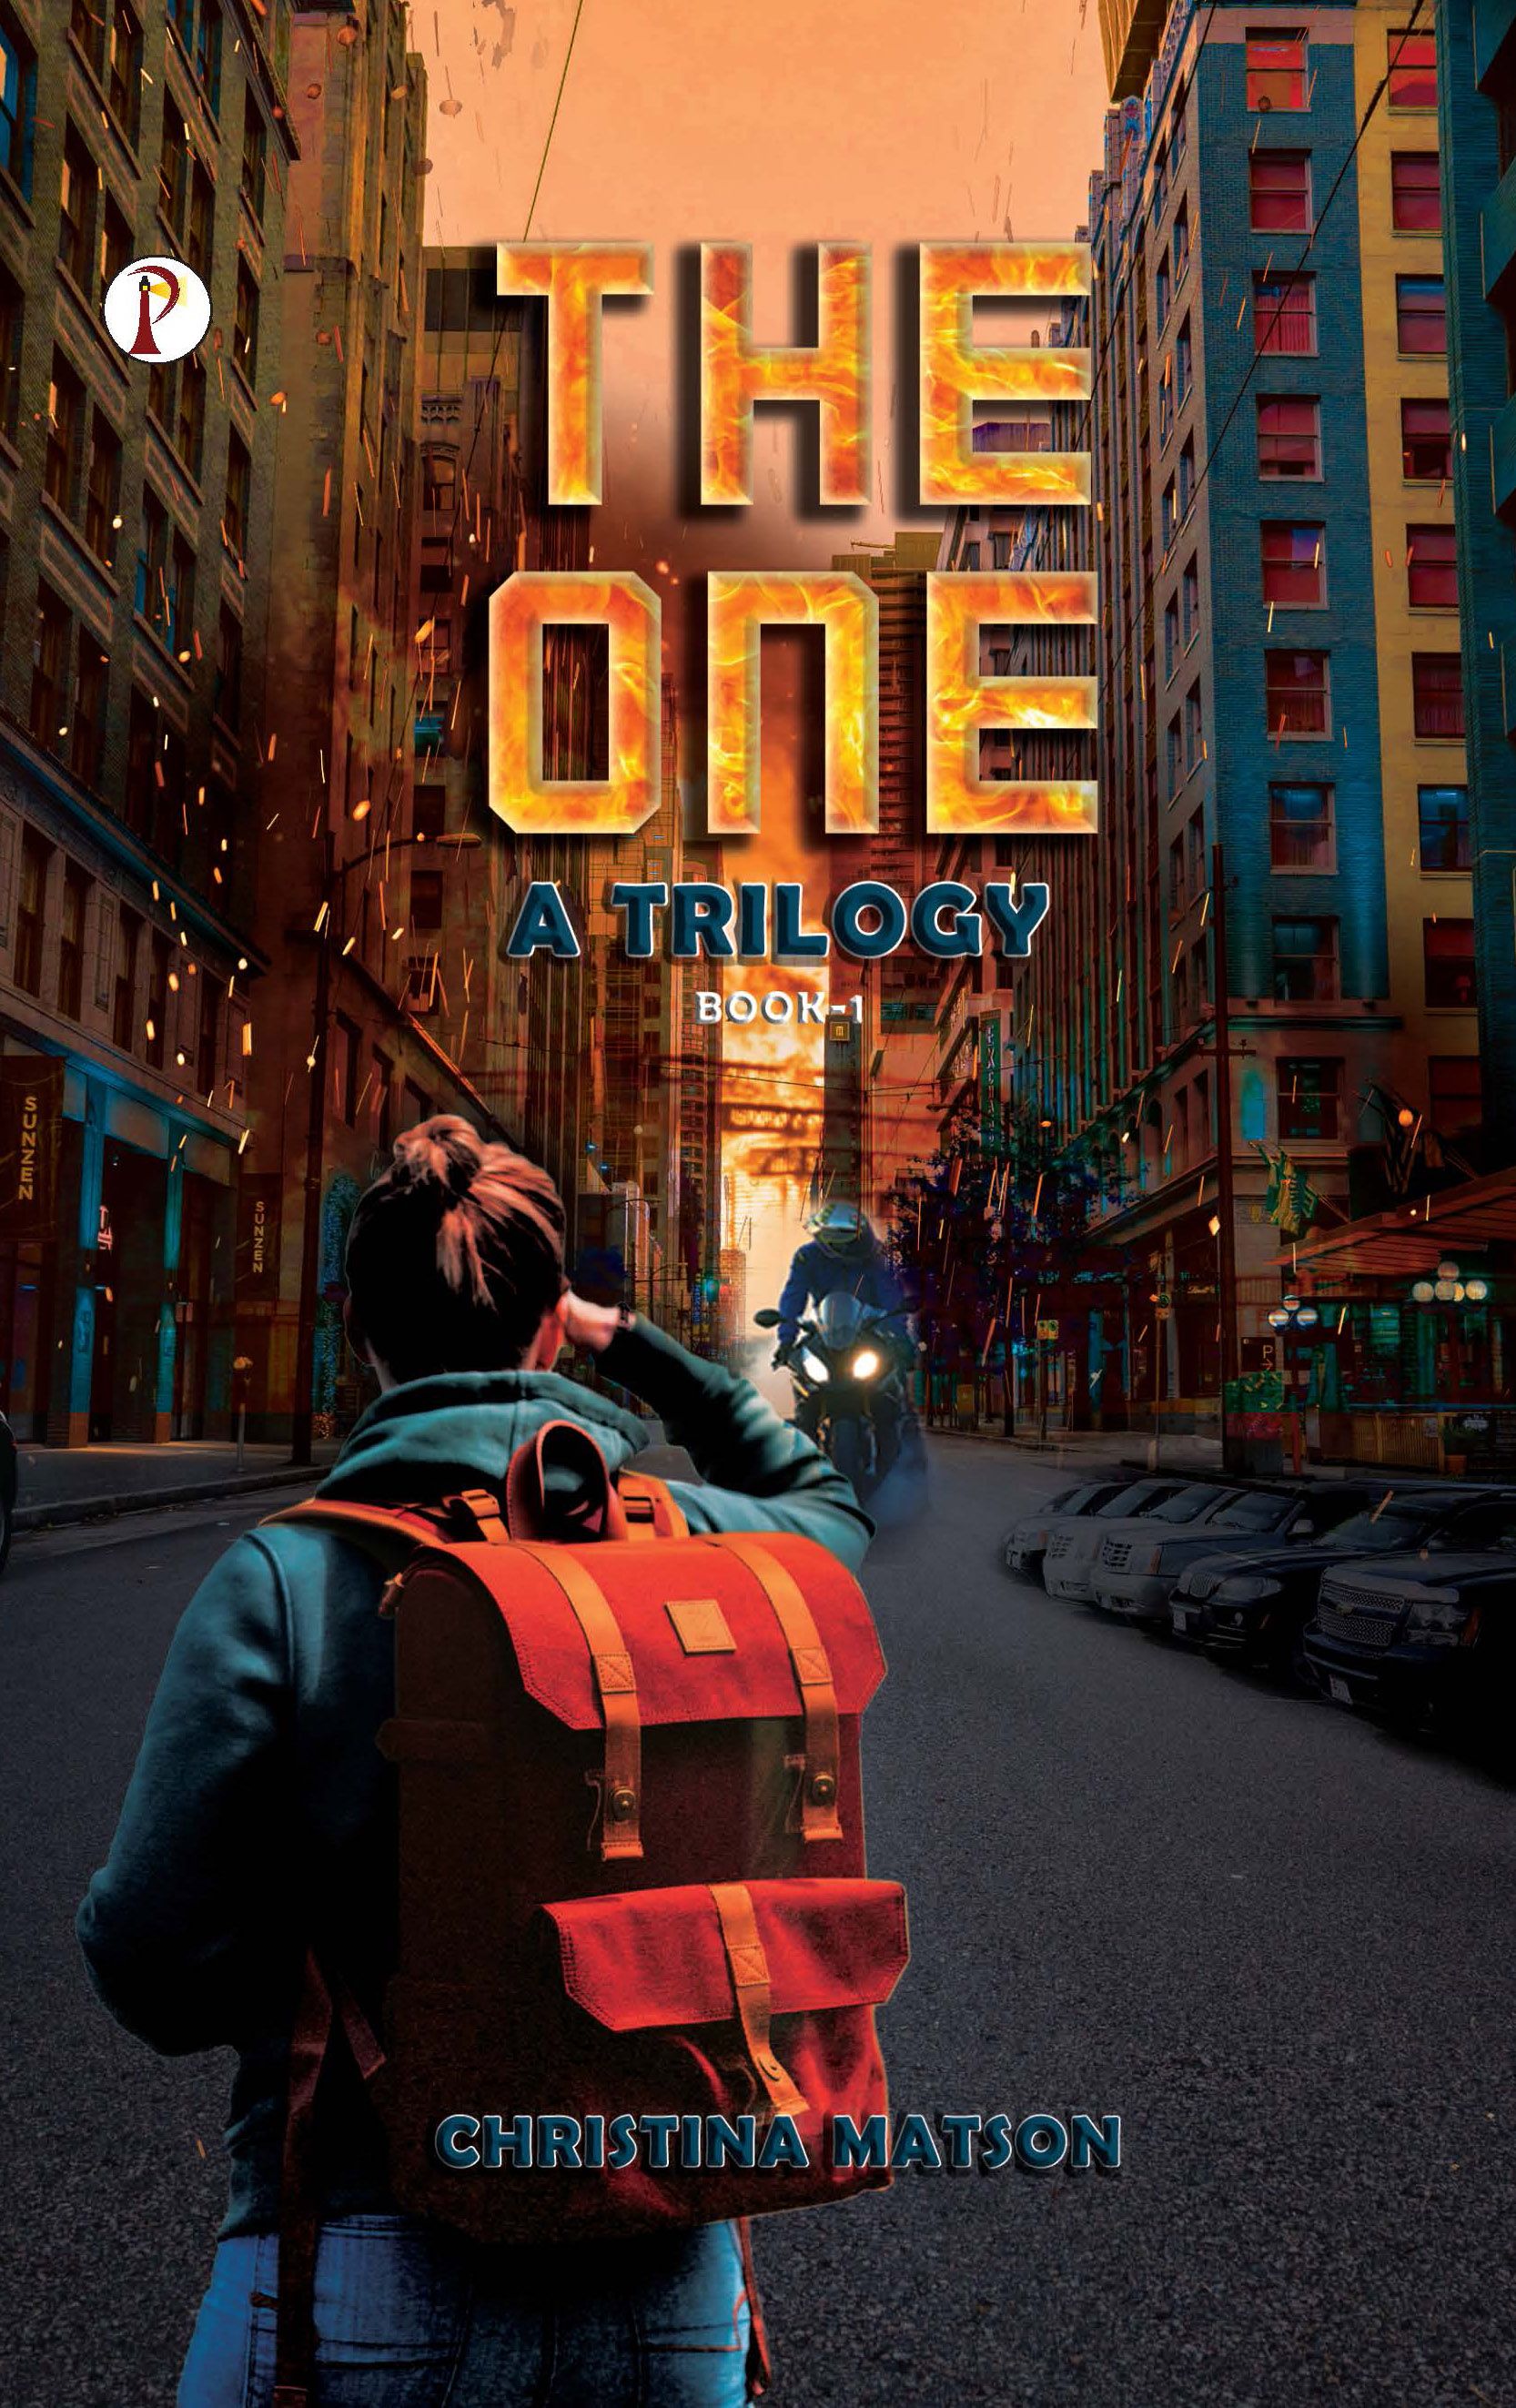 THE ONE A Trilogy Book 1